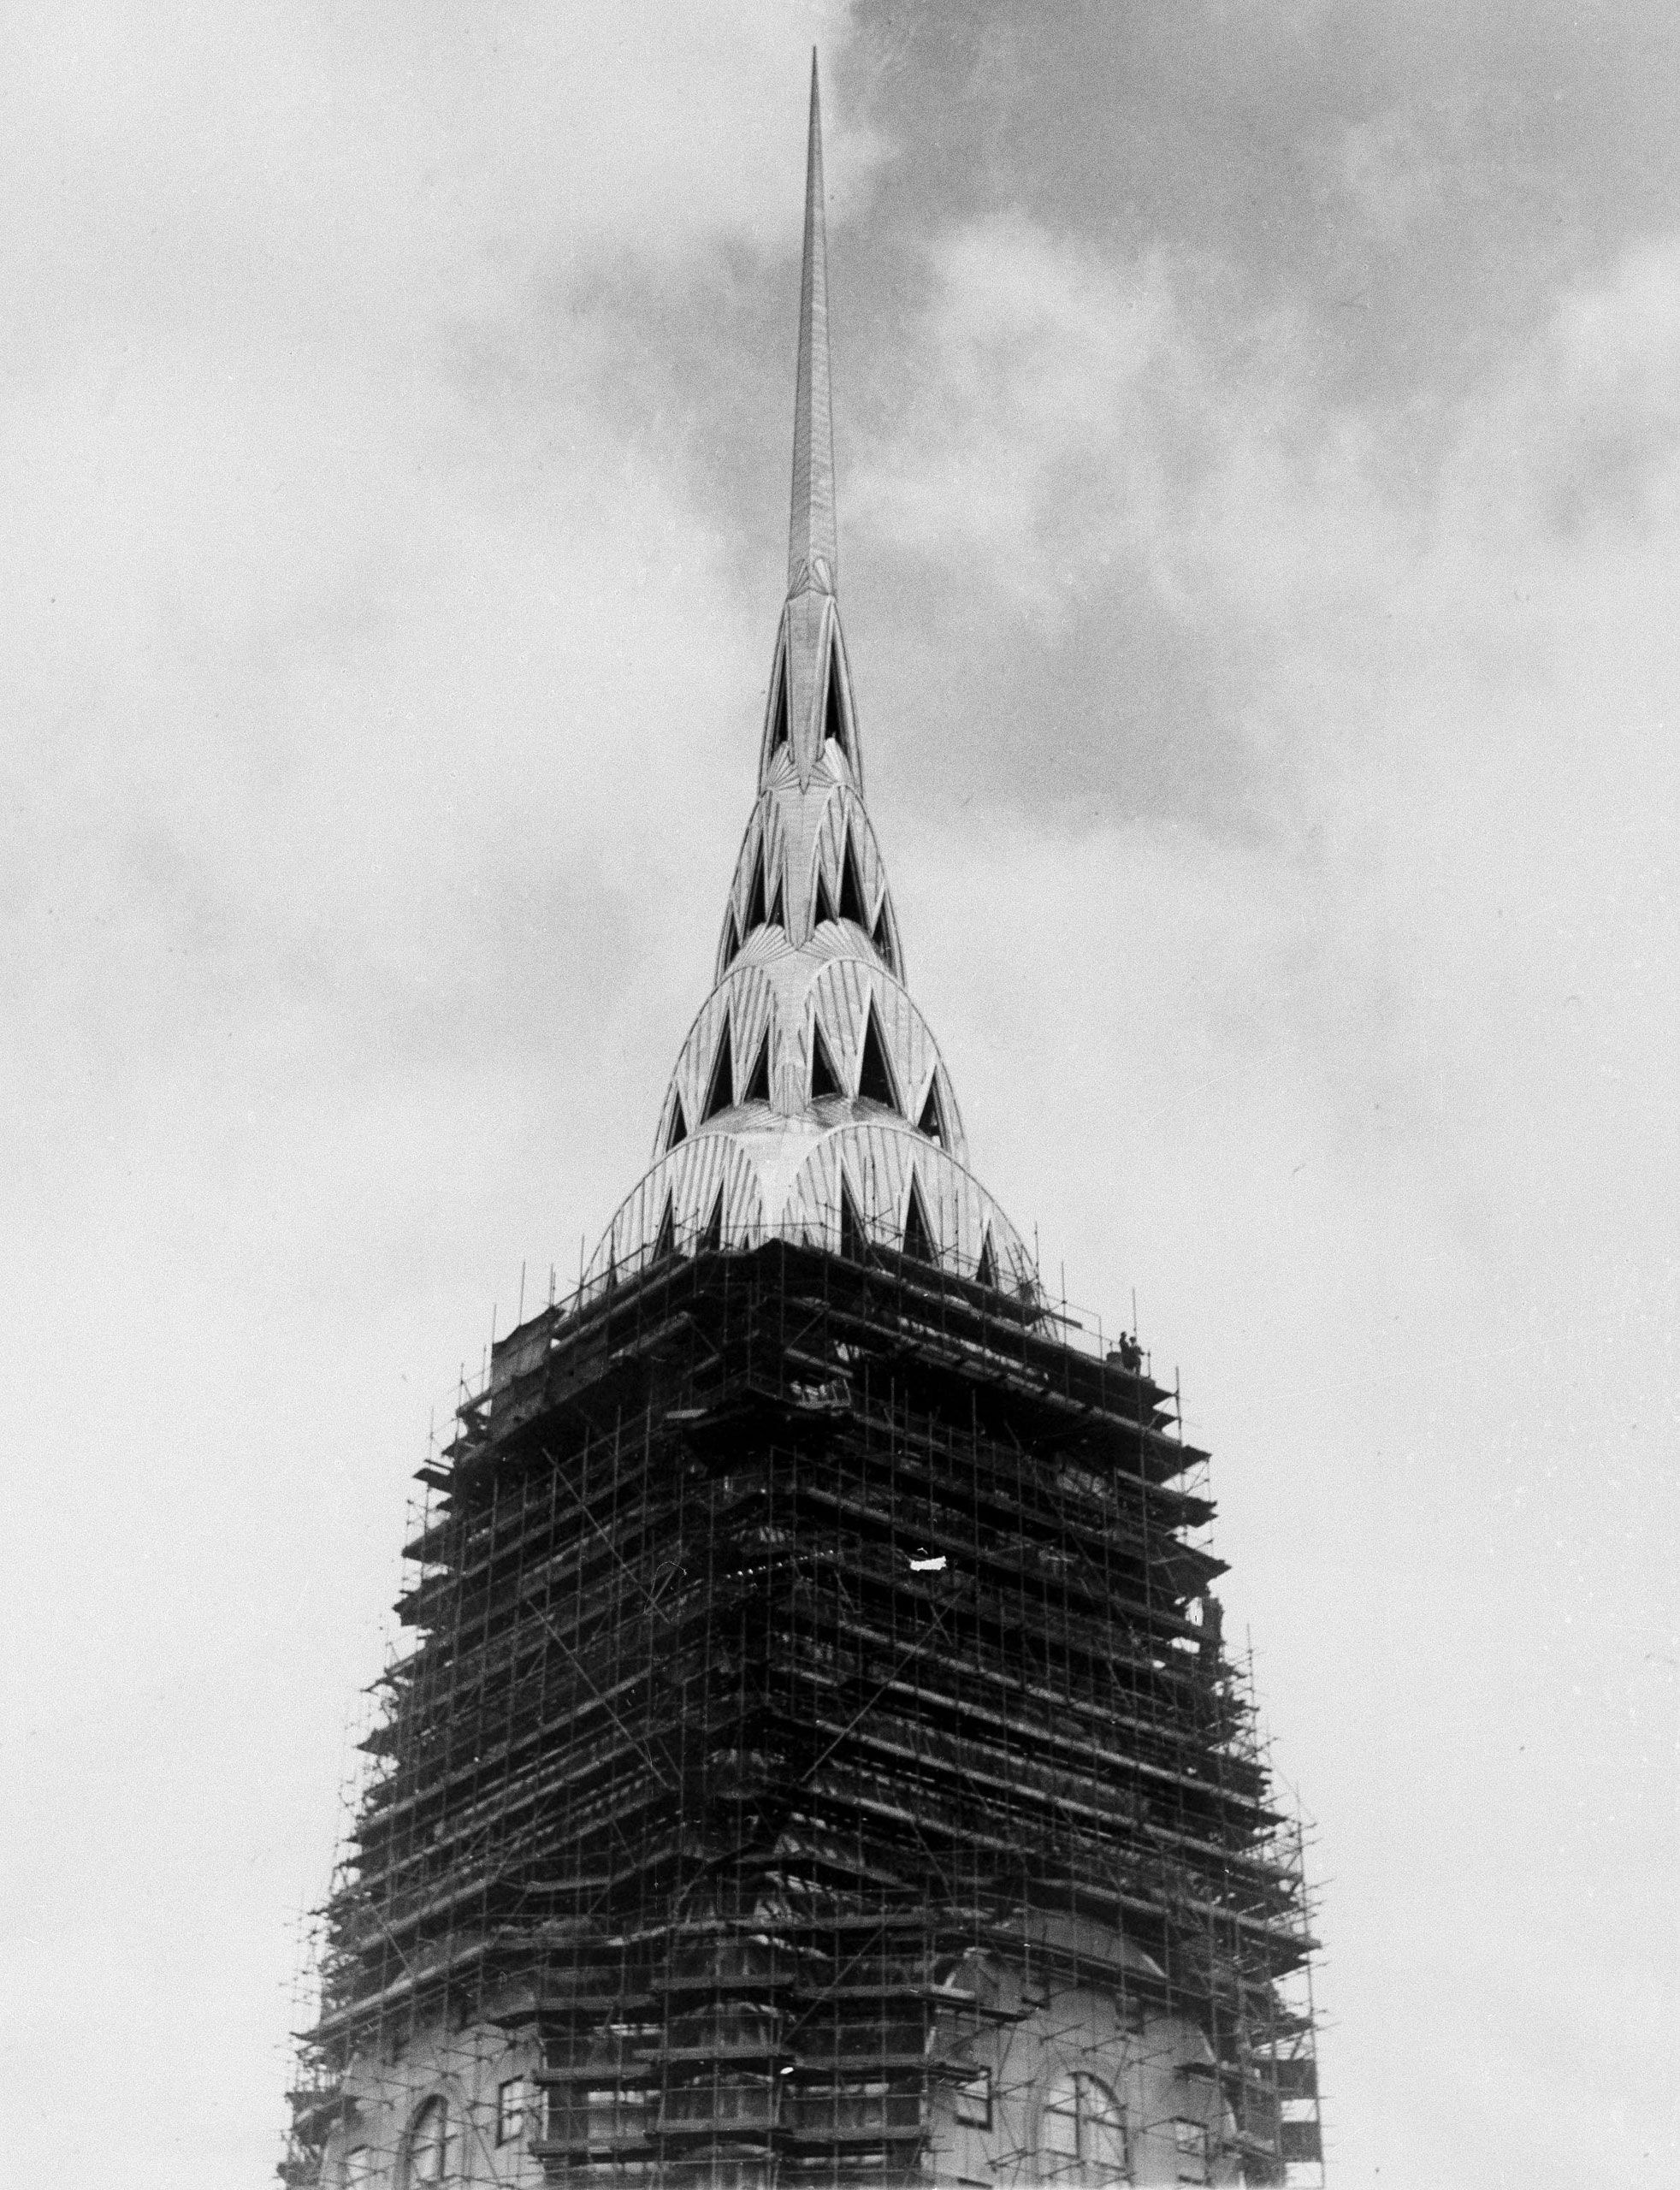 The sharp, glistening spire of the Chrysler Building stands revealed as the world's tallest building sheds its scaffolding, May 26, 1930.